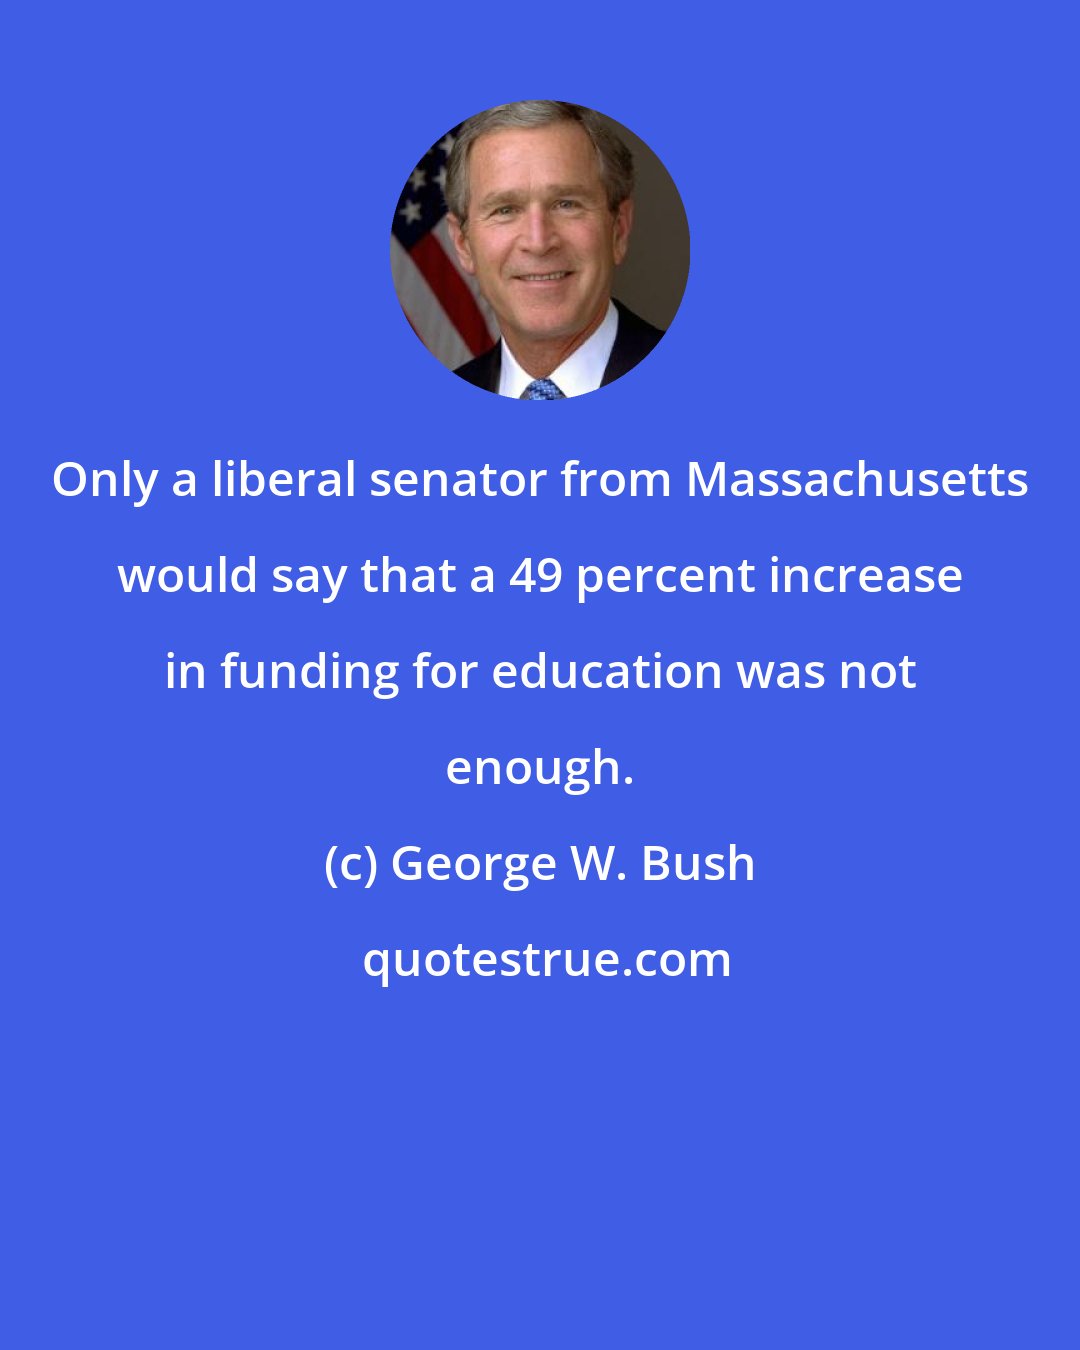 George W. Bush: Only a liberal senator from Massachusetts would say that a 49 percent increase in funding for education was not enough.